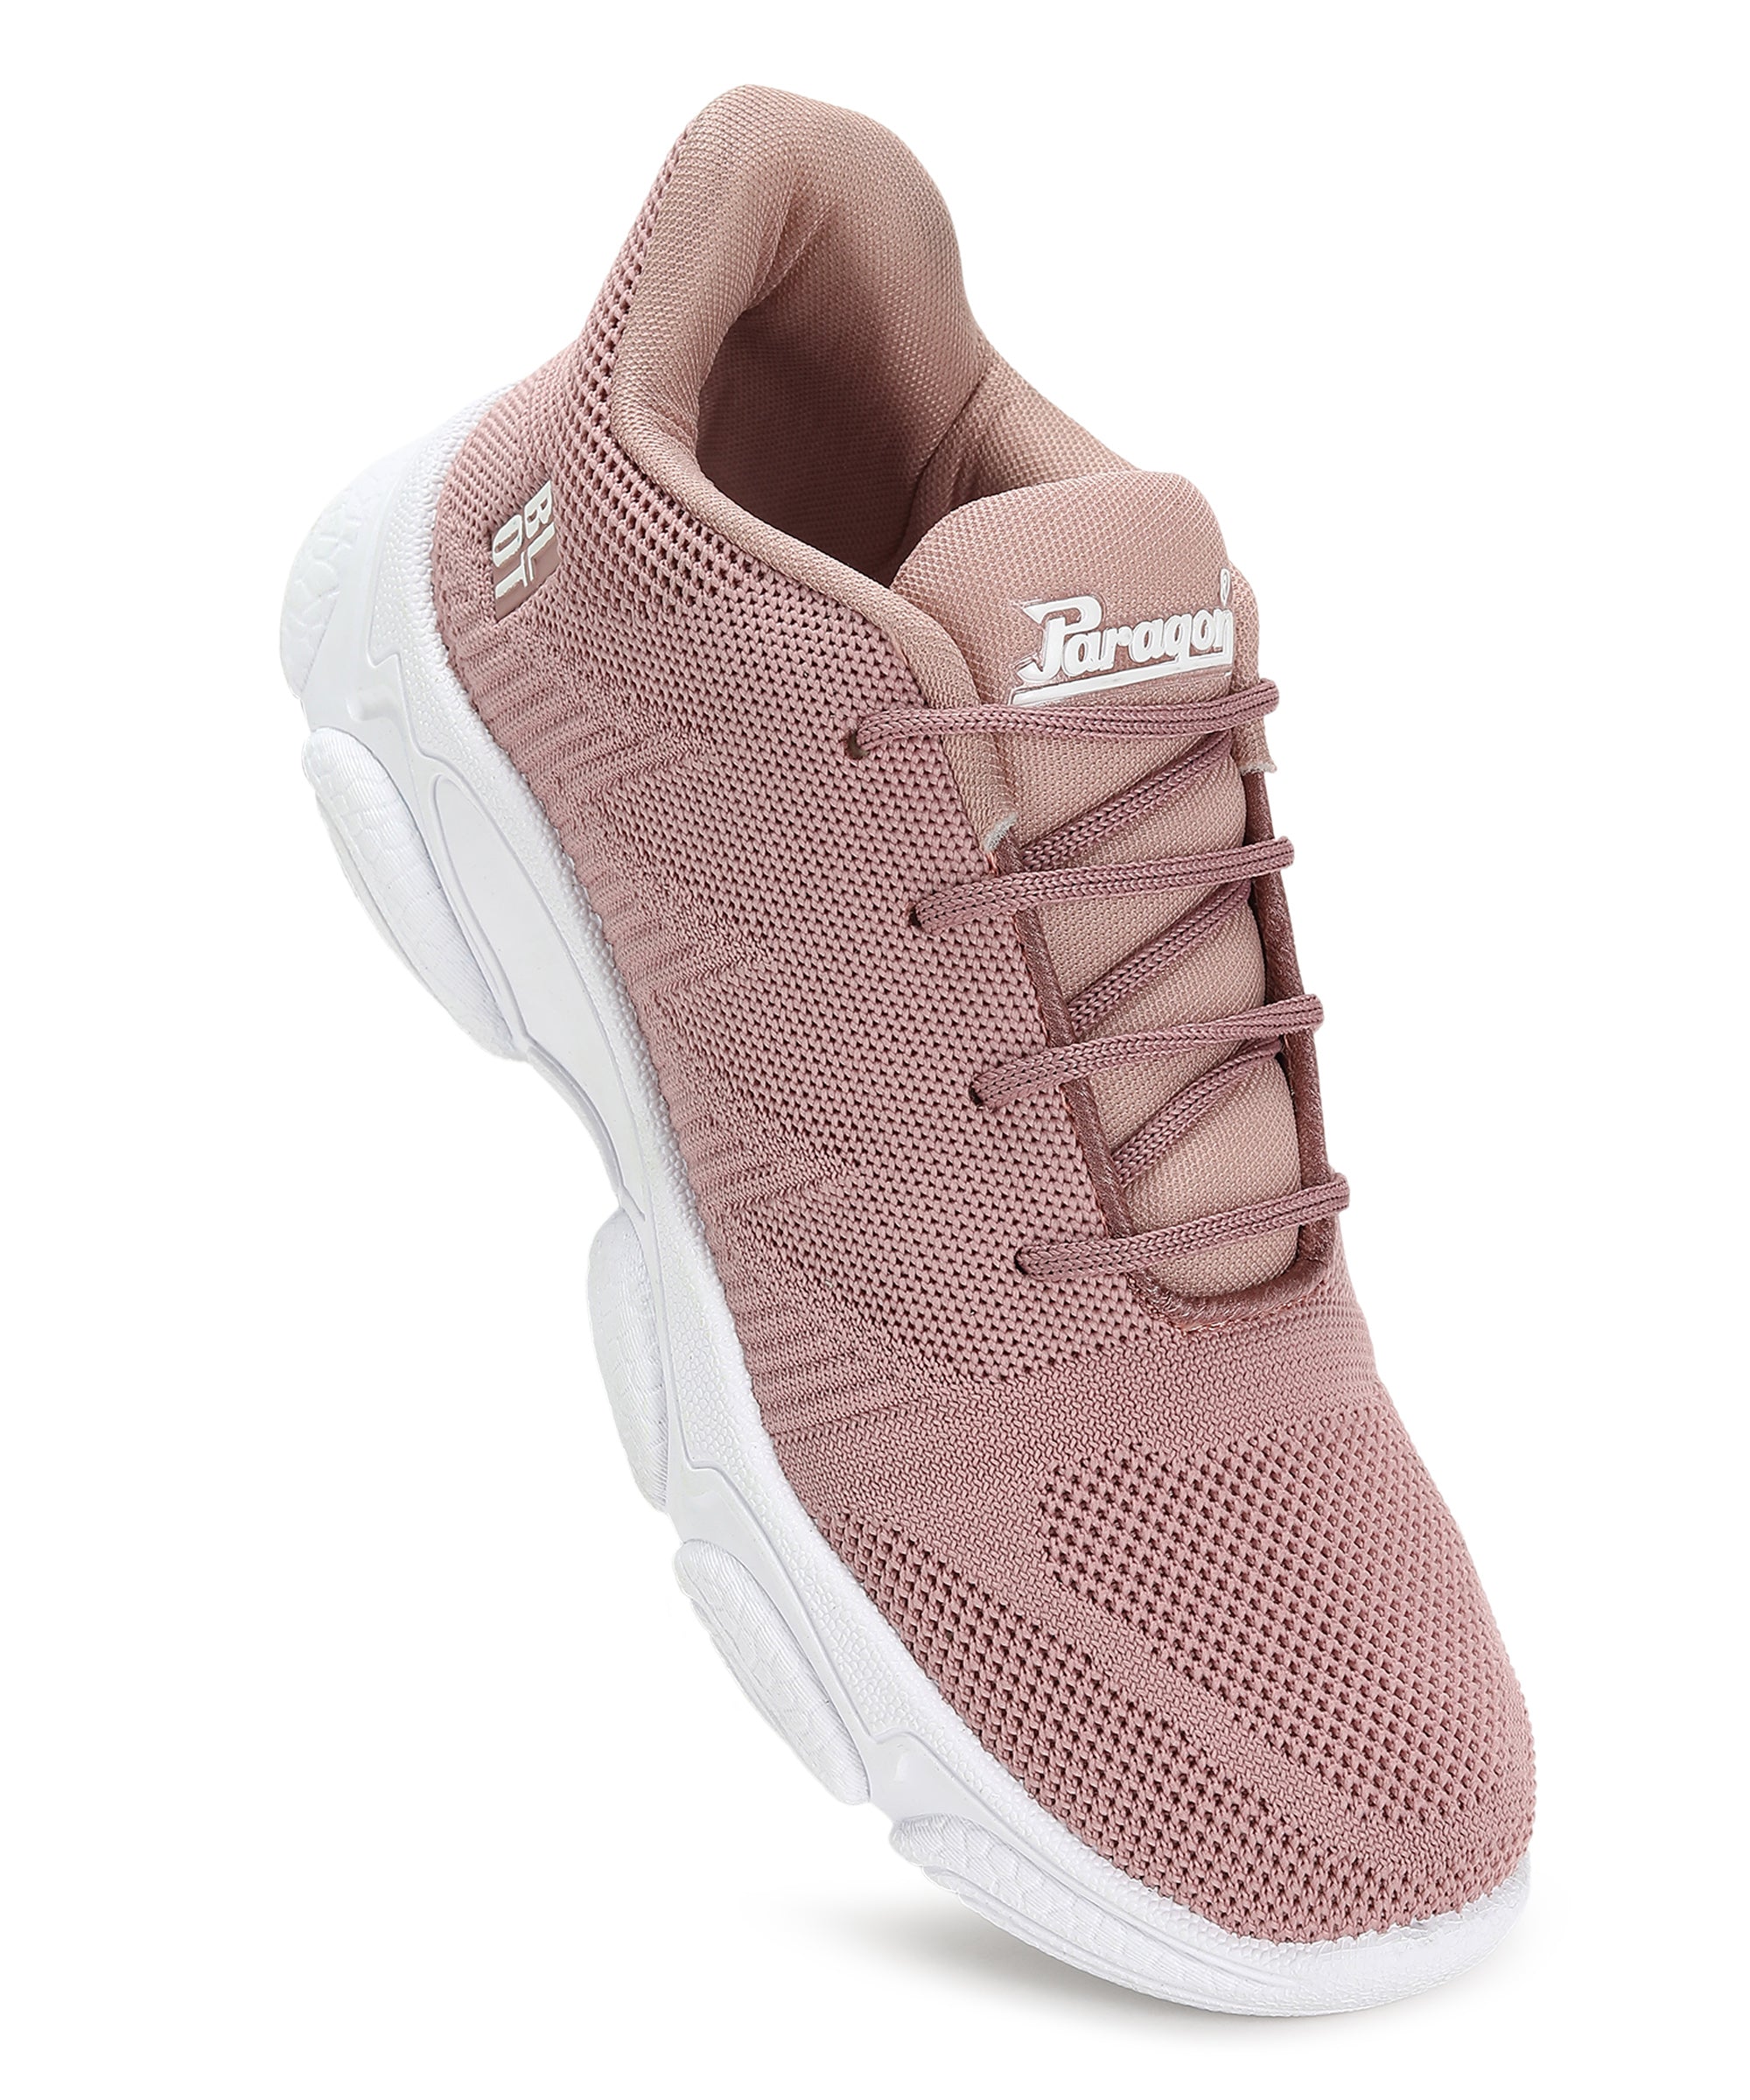 Paragon Blot K1023L Women Casual Shoes | Sleek &amp; Stylish | Latest Trend | Casual &amp; Comfortable | For Daily Wear